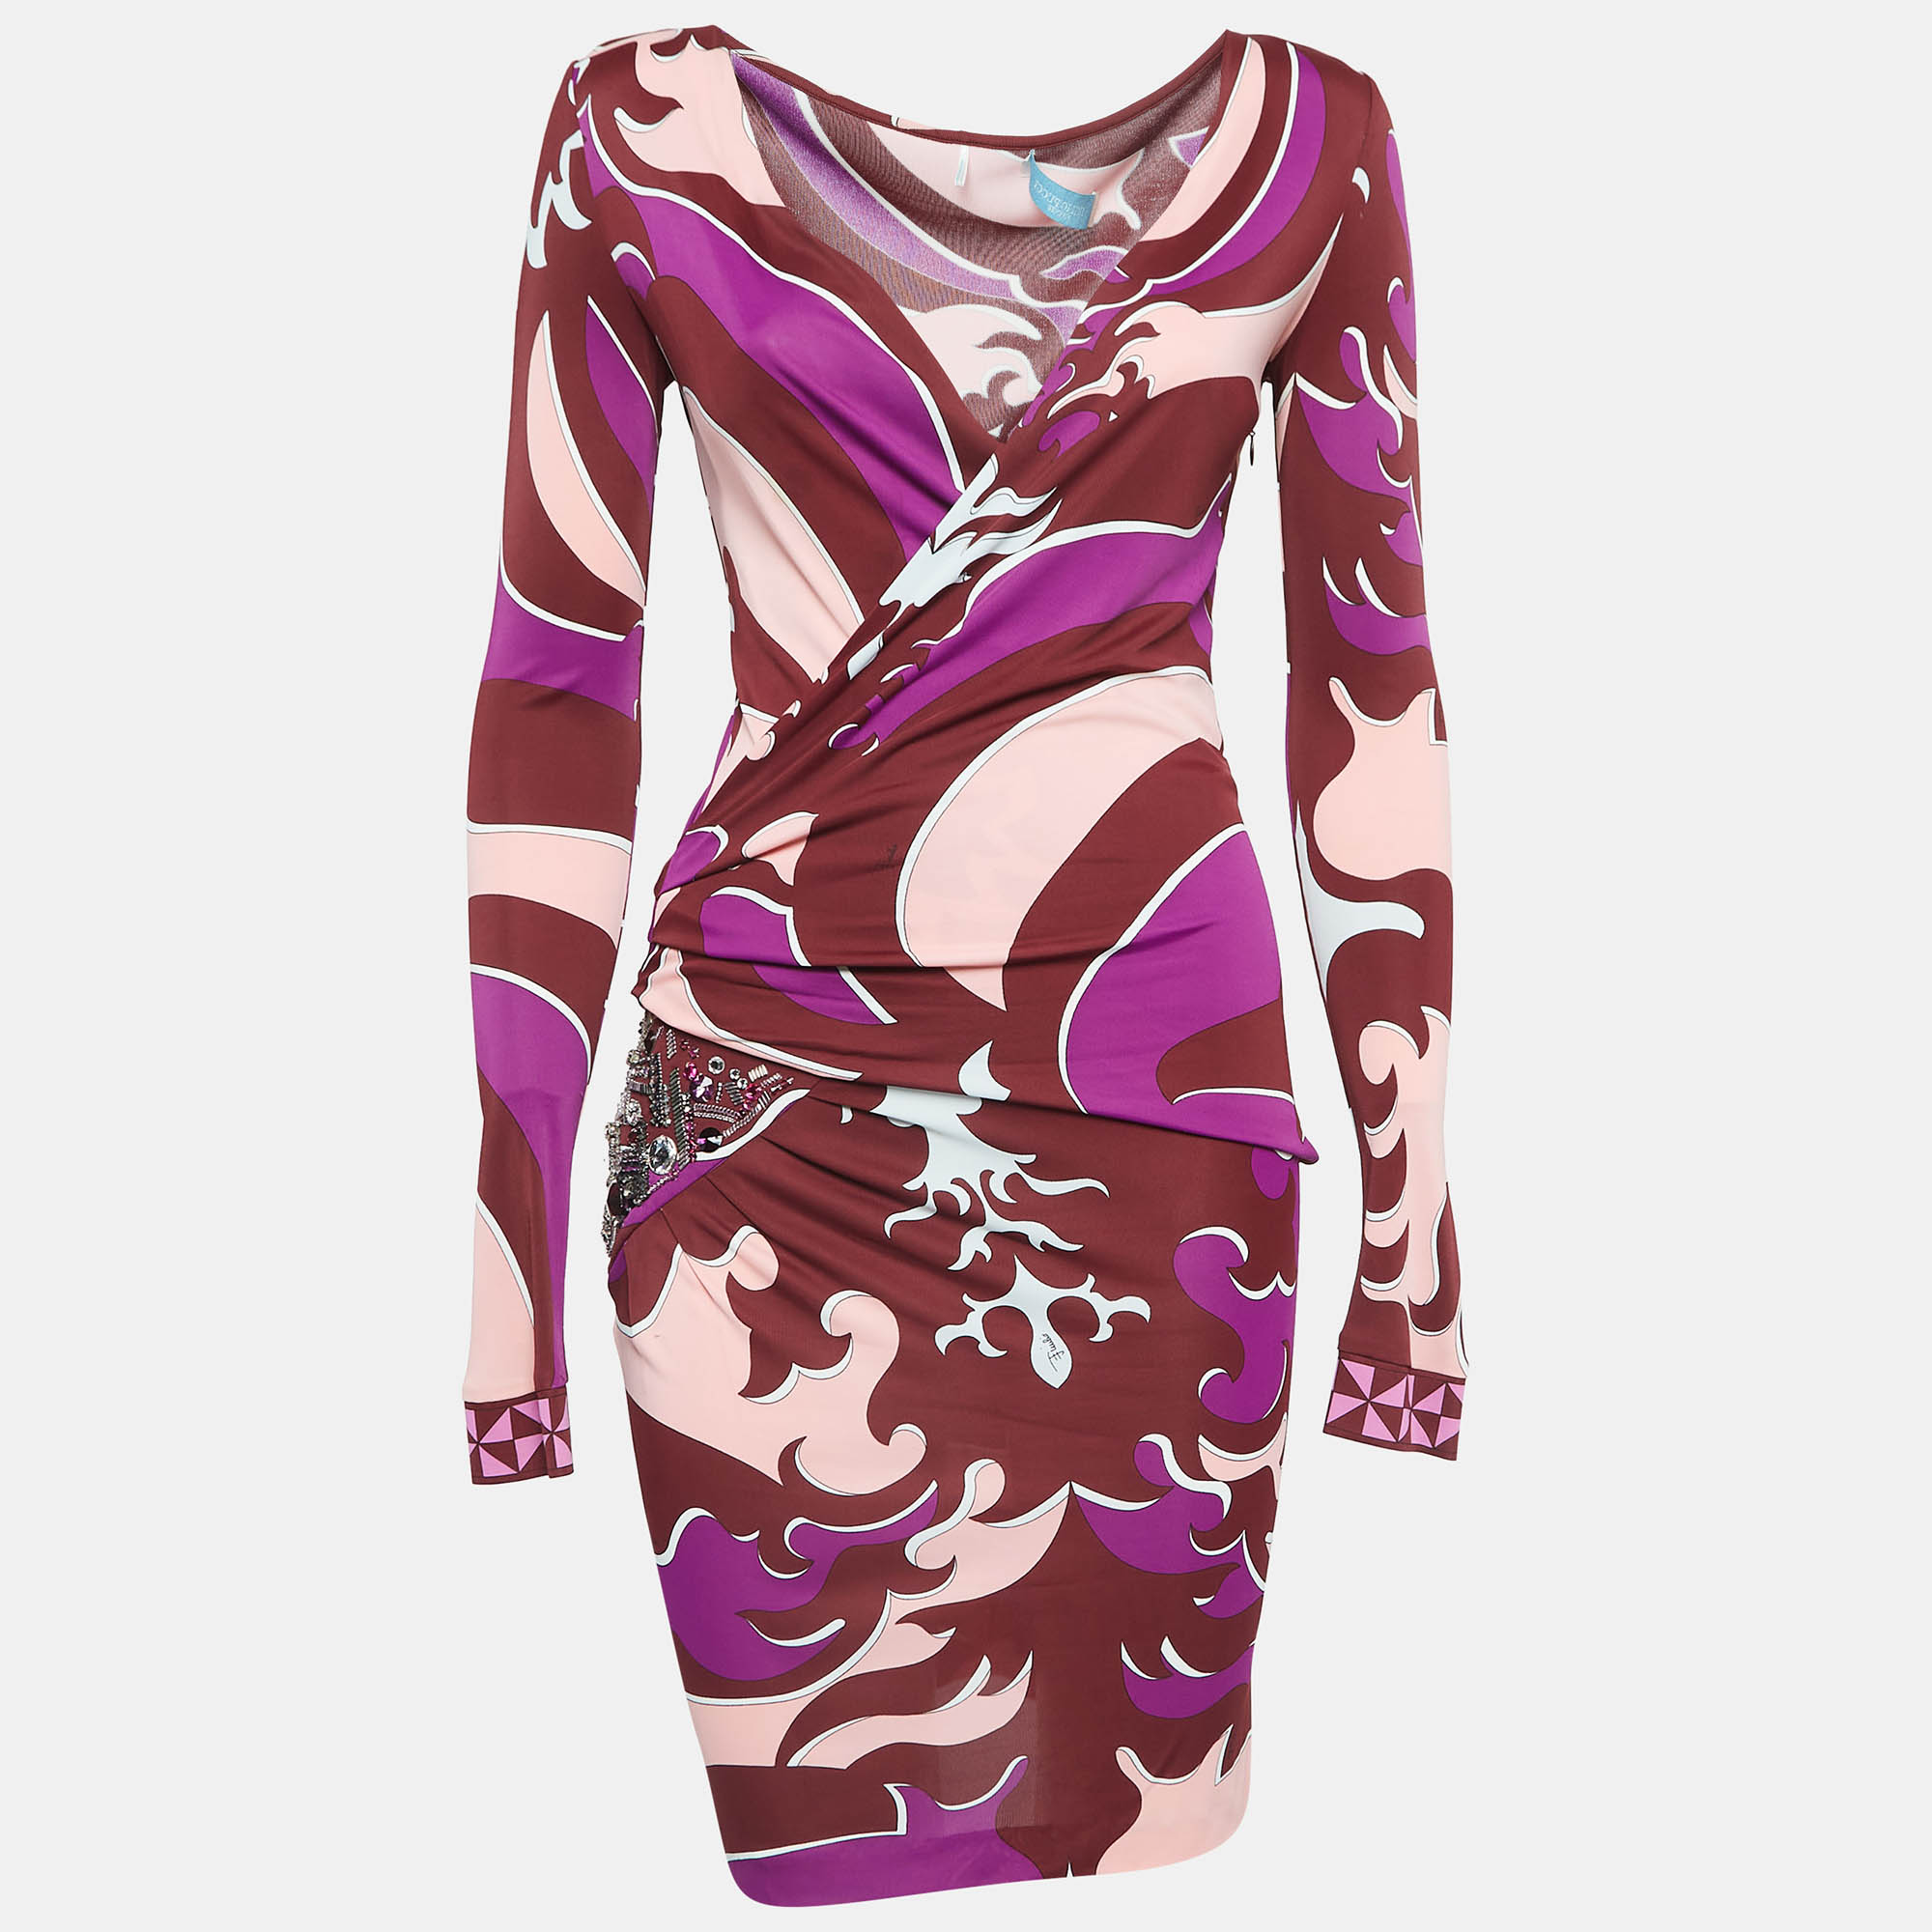 Emilio pucci multicolor printed jersey embellished short dress s